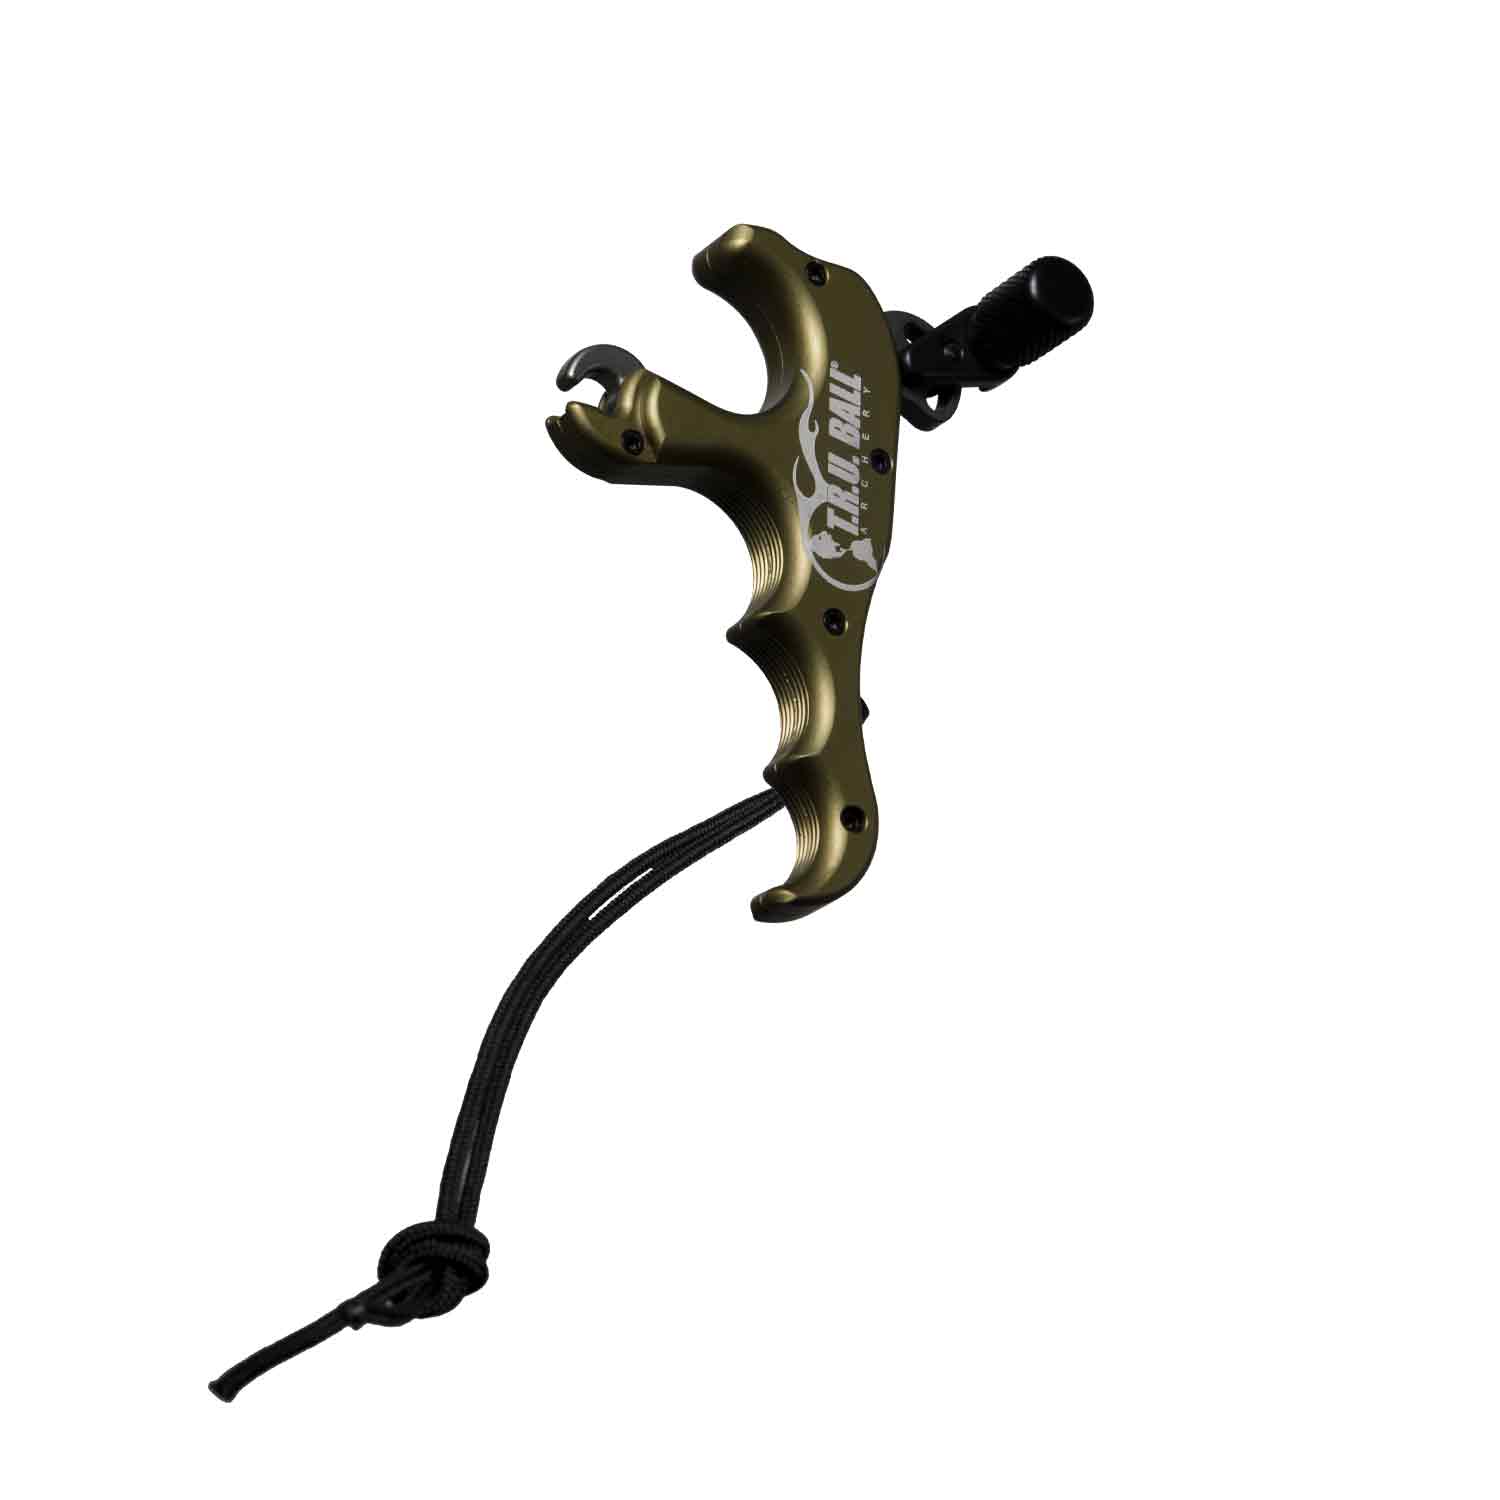 T.R.U. Ball Tactical Bowhunting Stalk'r Thumb Release